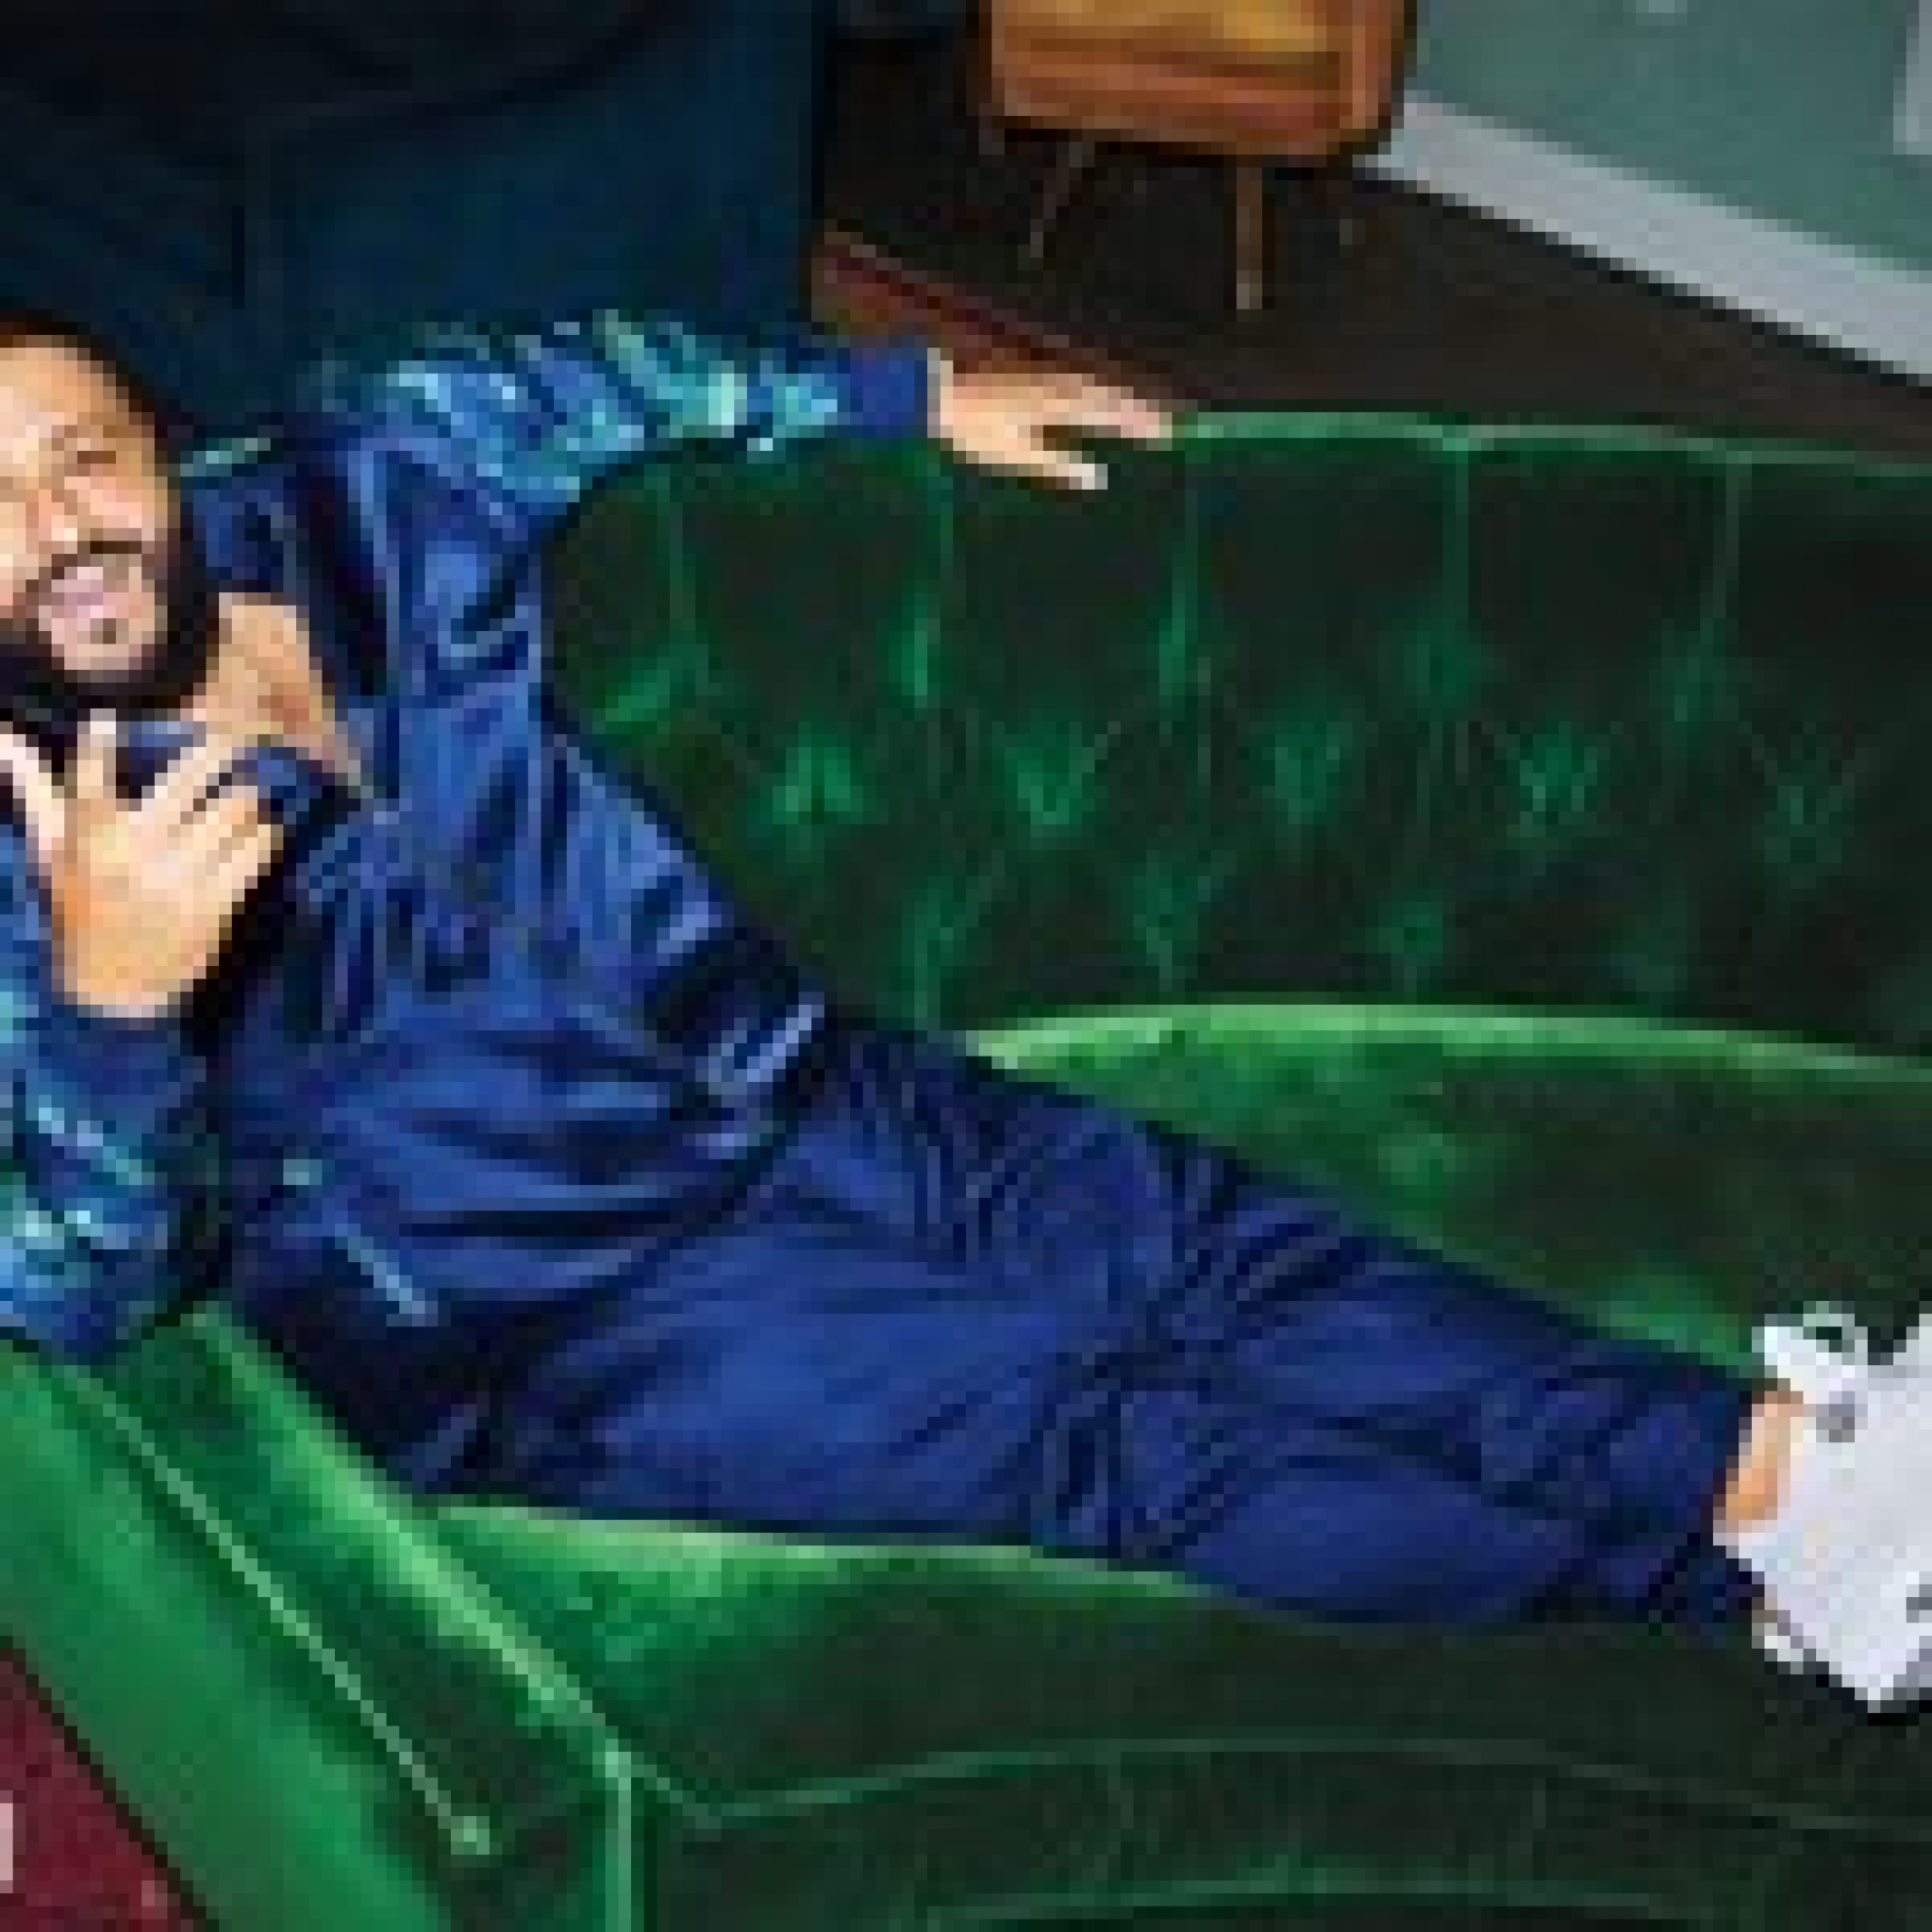 DJ Khaled’s ‘Every Chance I Get’ Debuts in Top 10 on Hot R&B/Hip-Hop Songs